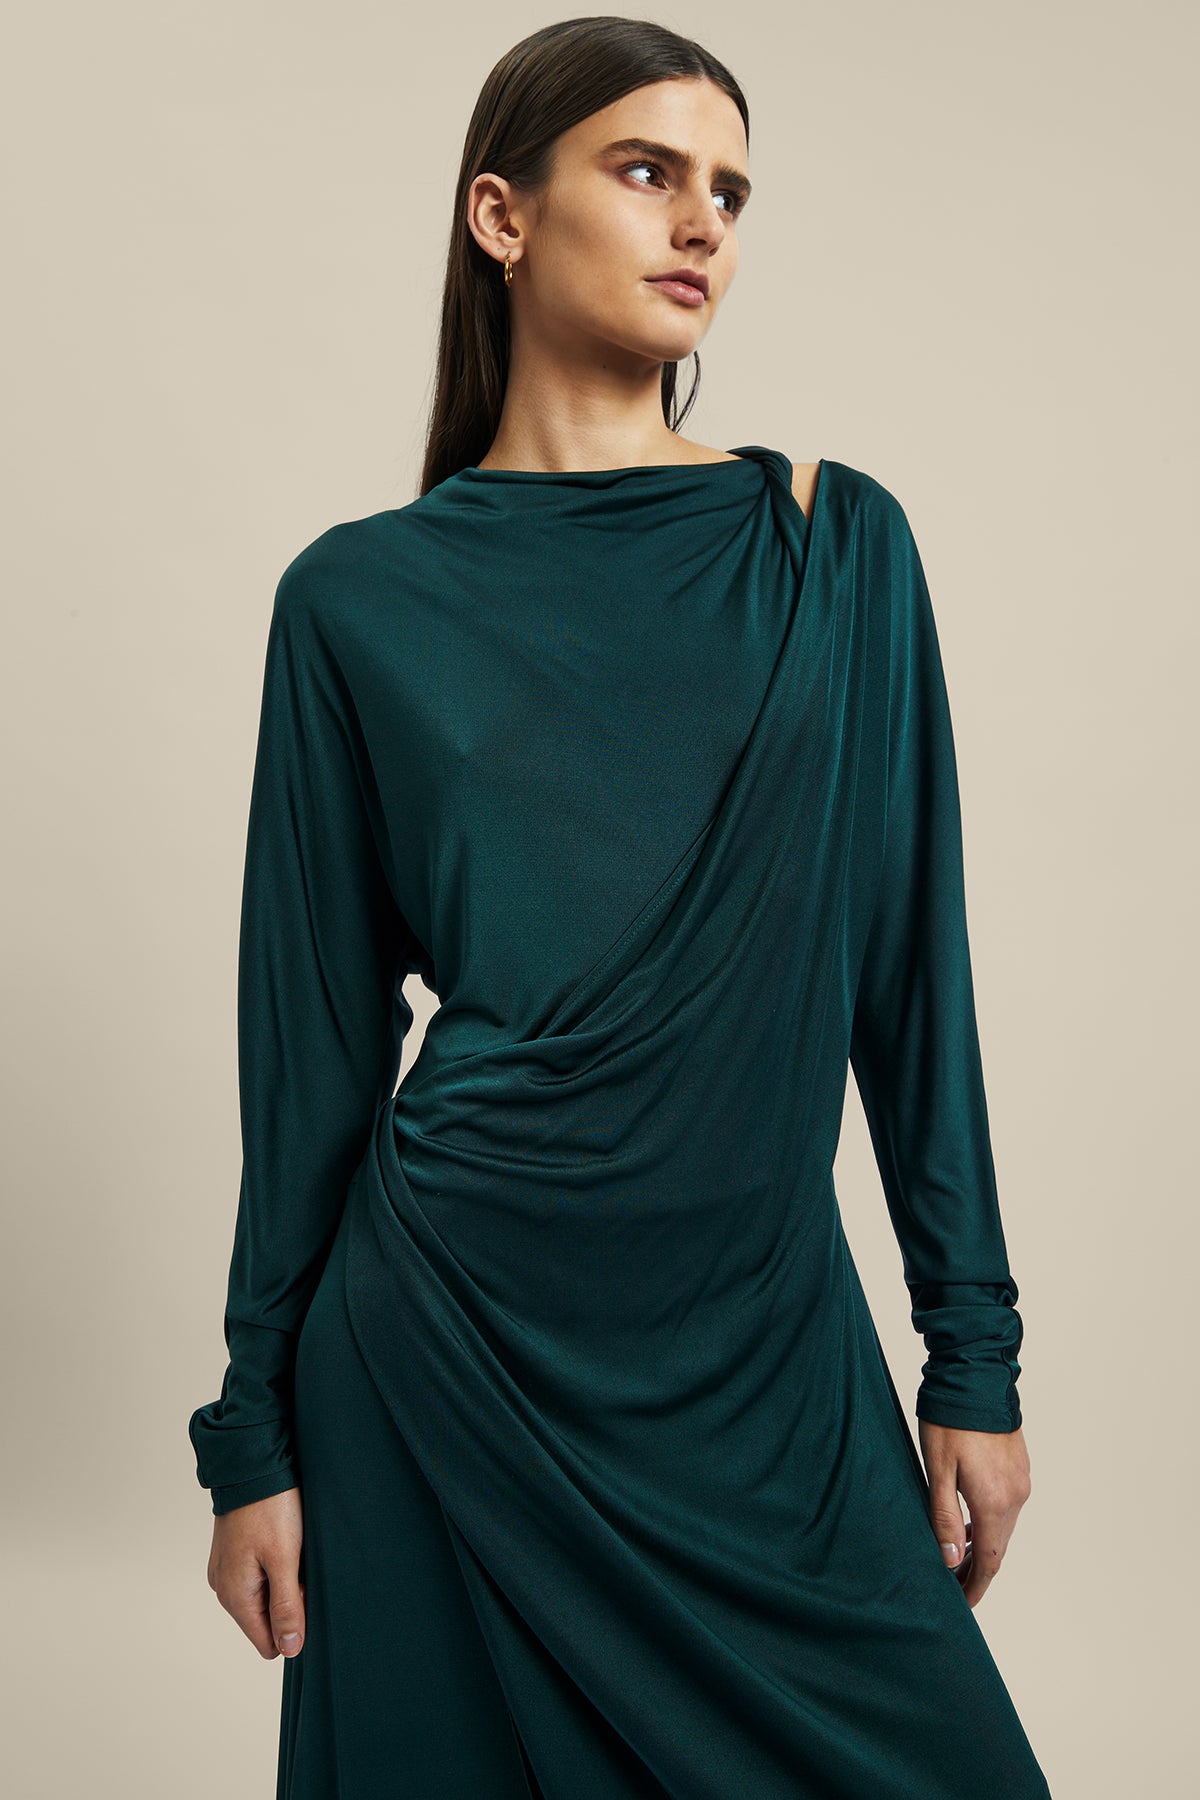 Model wearing the forest green silk Coalesce Twist Front Dress from Australian women’s designer Ginger and Smart featuring bias cut, cut out derail above the collarbone and midi length.